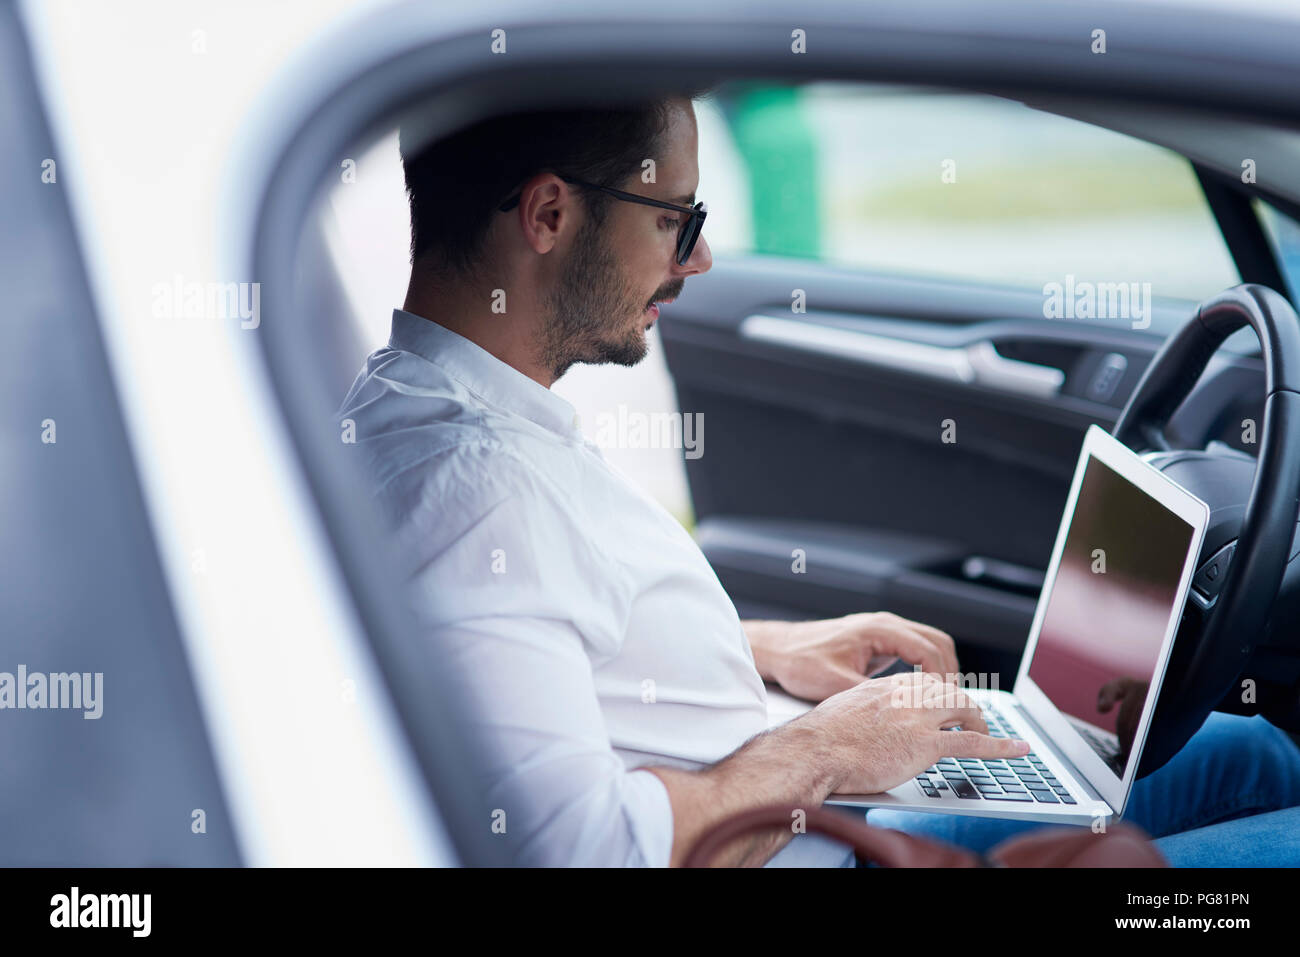 Businessman sitting in car working on laptop Banque D'Images